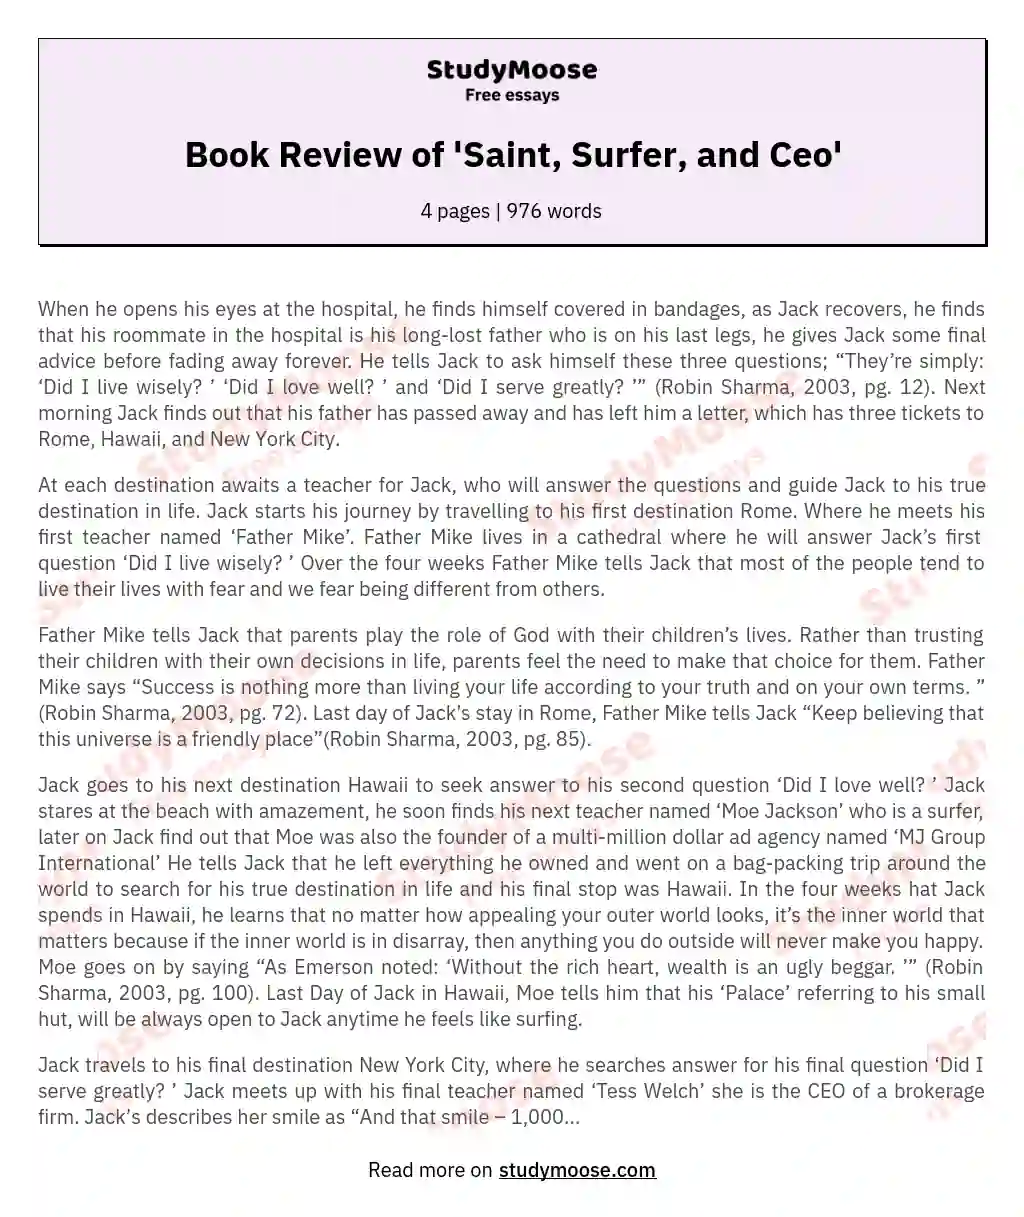 Book Review of 'Saint, Surfer, and Ceo' essay